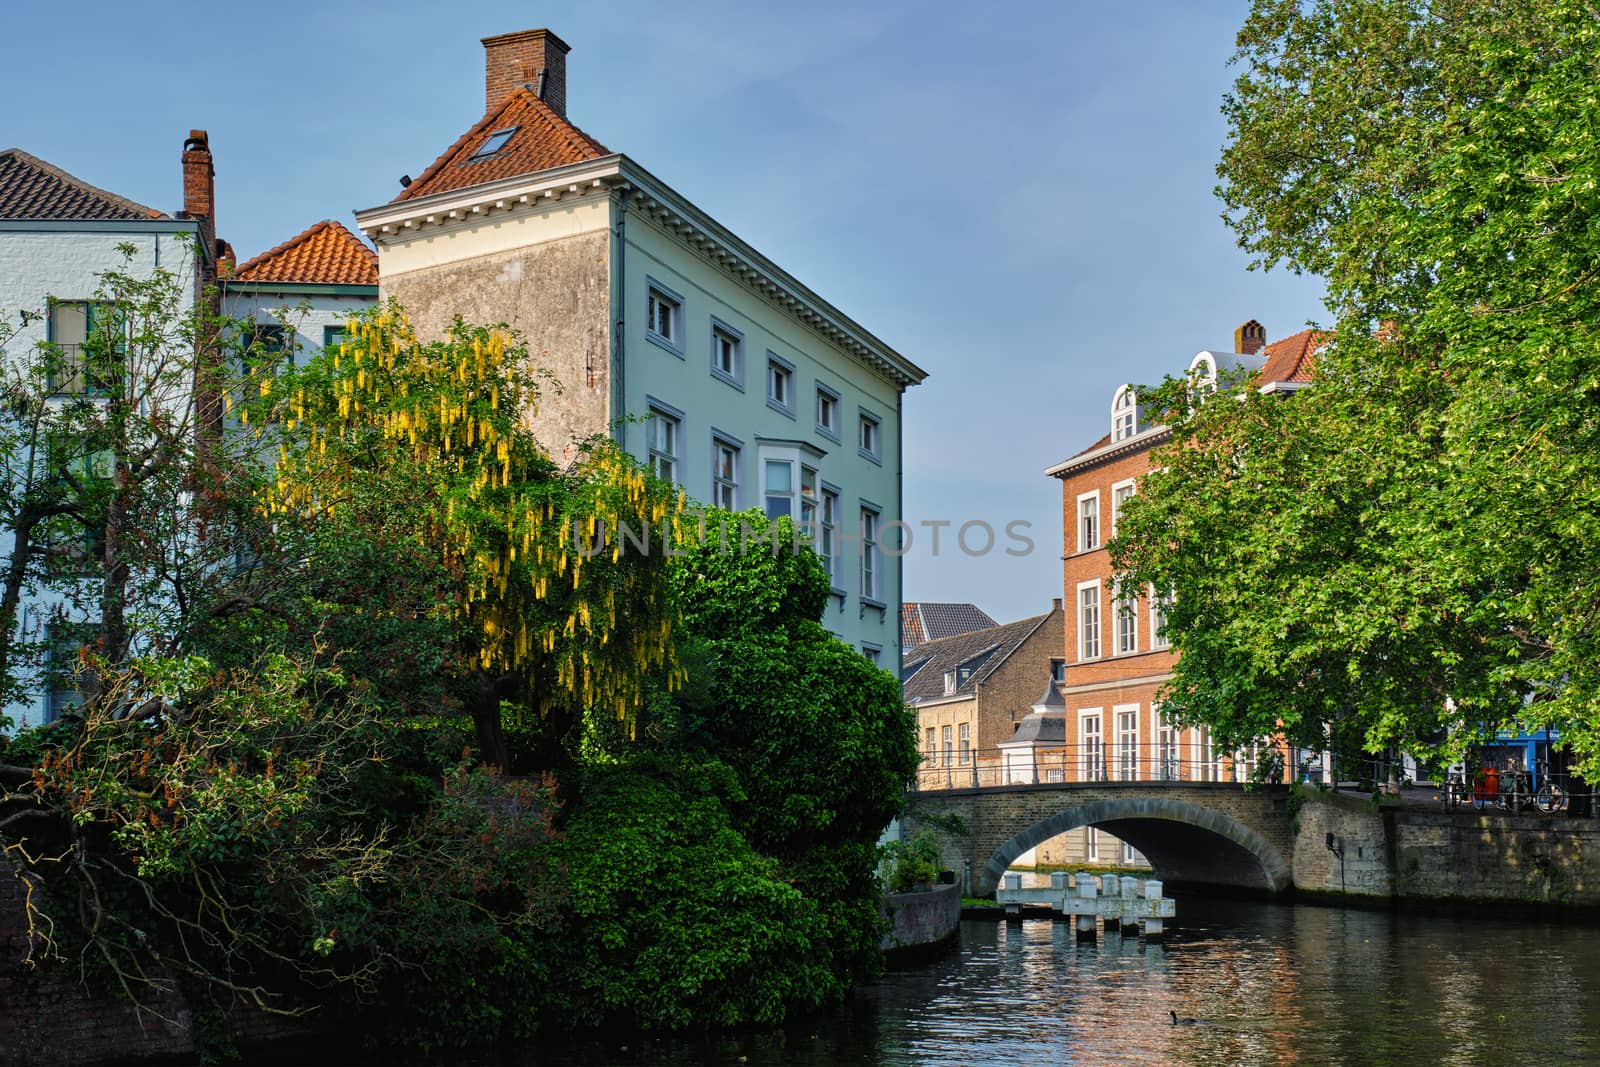 Brugge canal and old houses. Bruges, Belgium by dimol